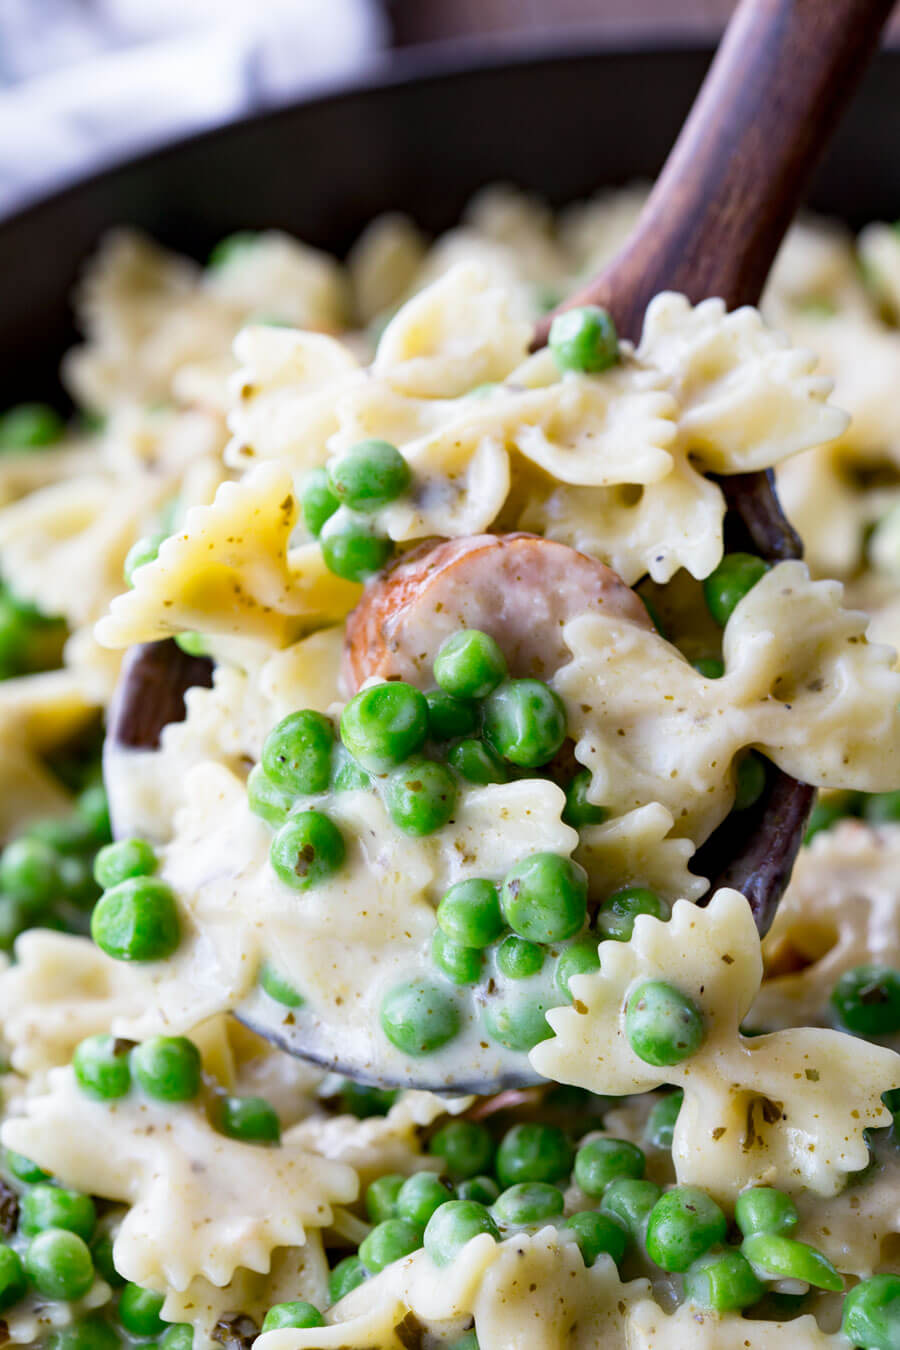 Quick, easy, and oh so delicious, this skillet pasta is a real winner with chicken sausage, peas, alfredo, and pesto